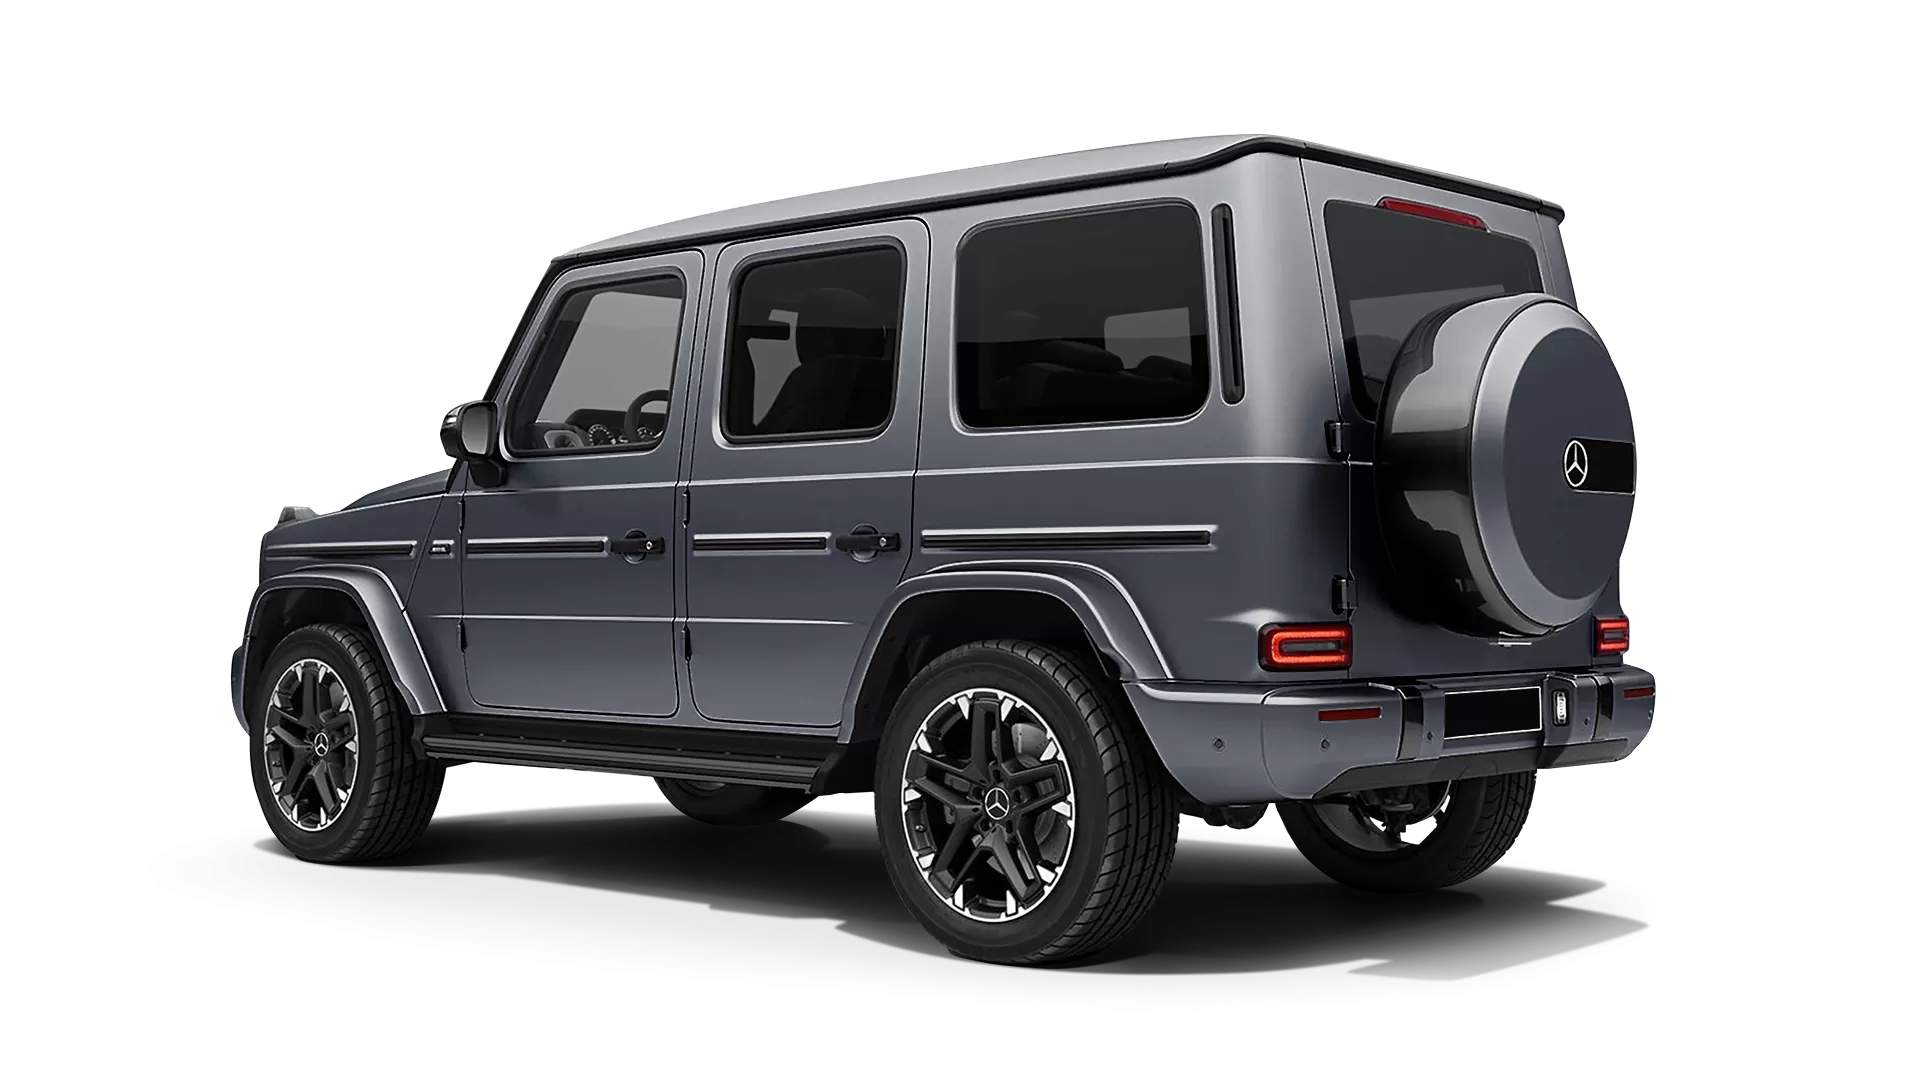 Mercedes G class W463 stock rear view in Platinum Magno color